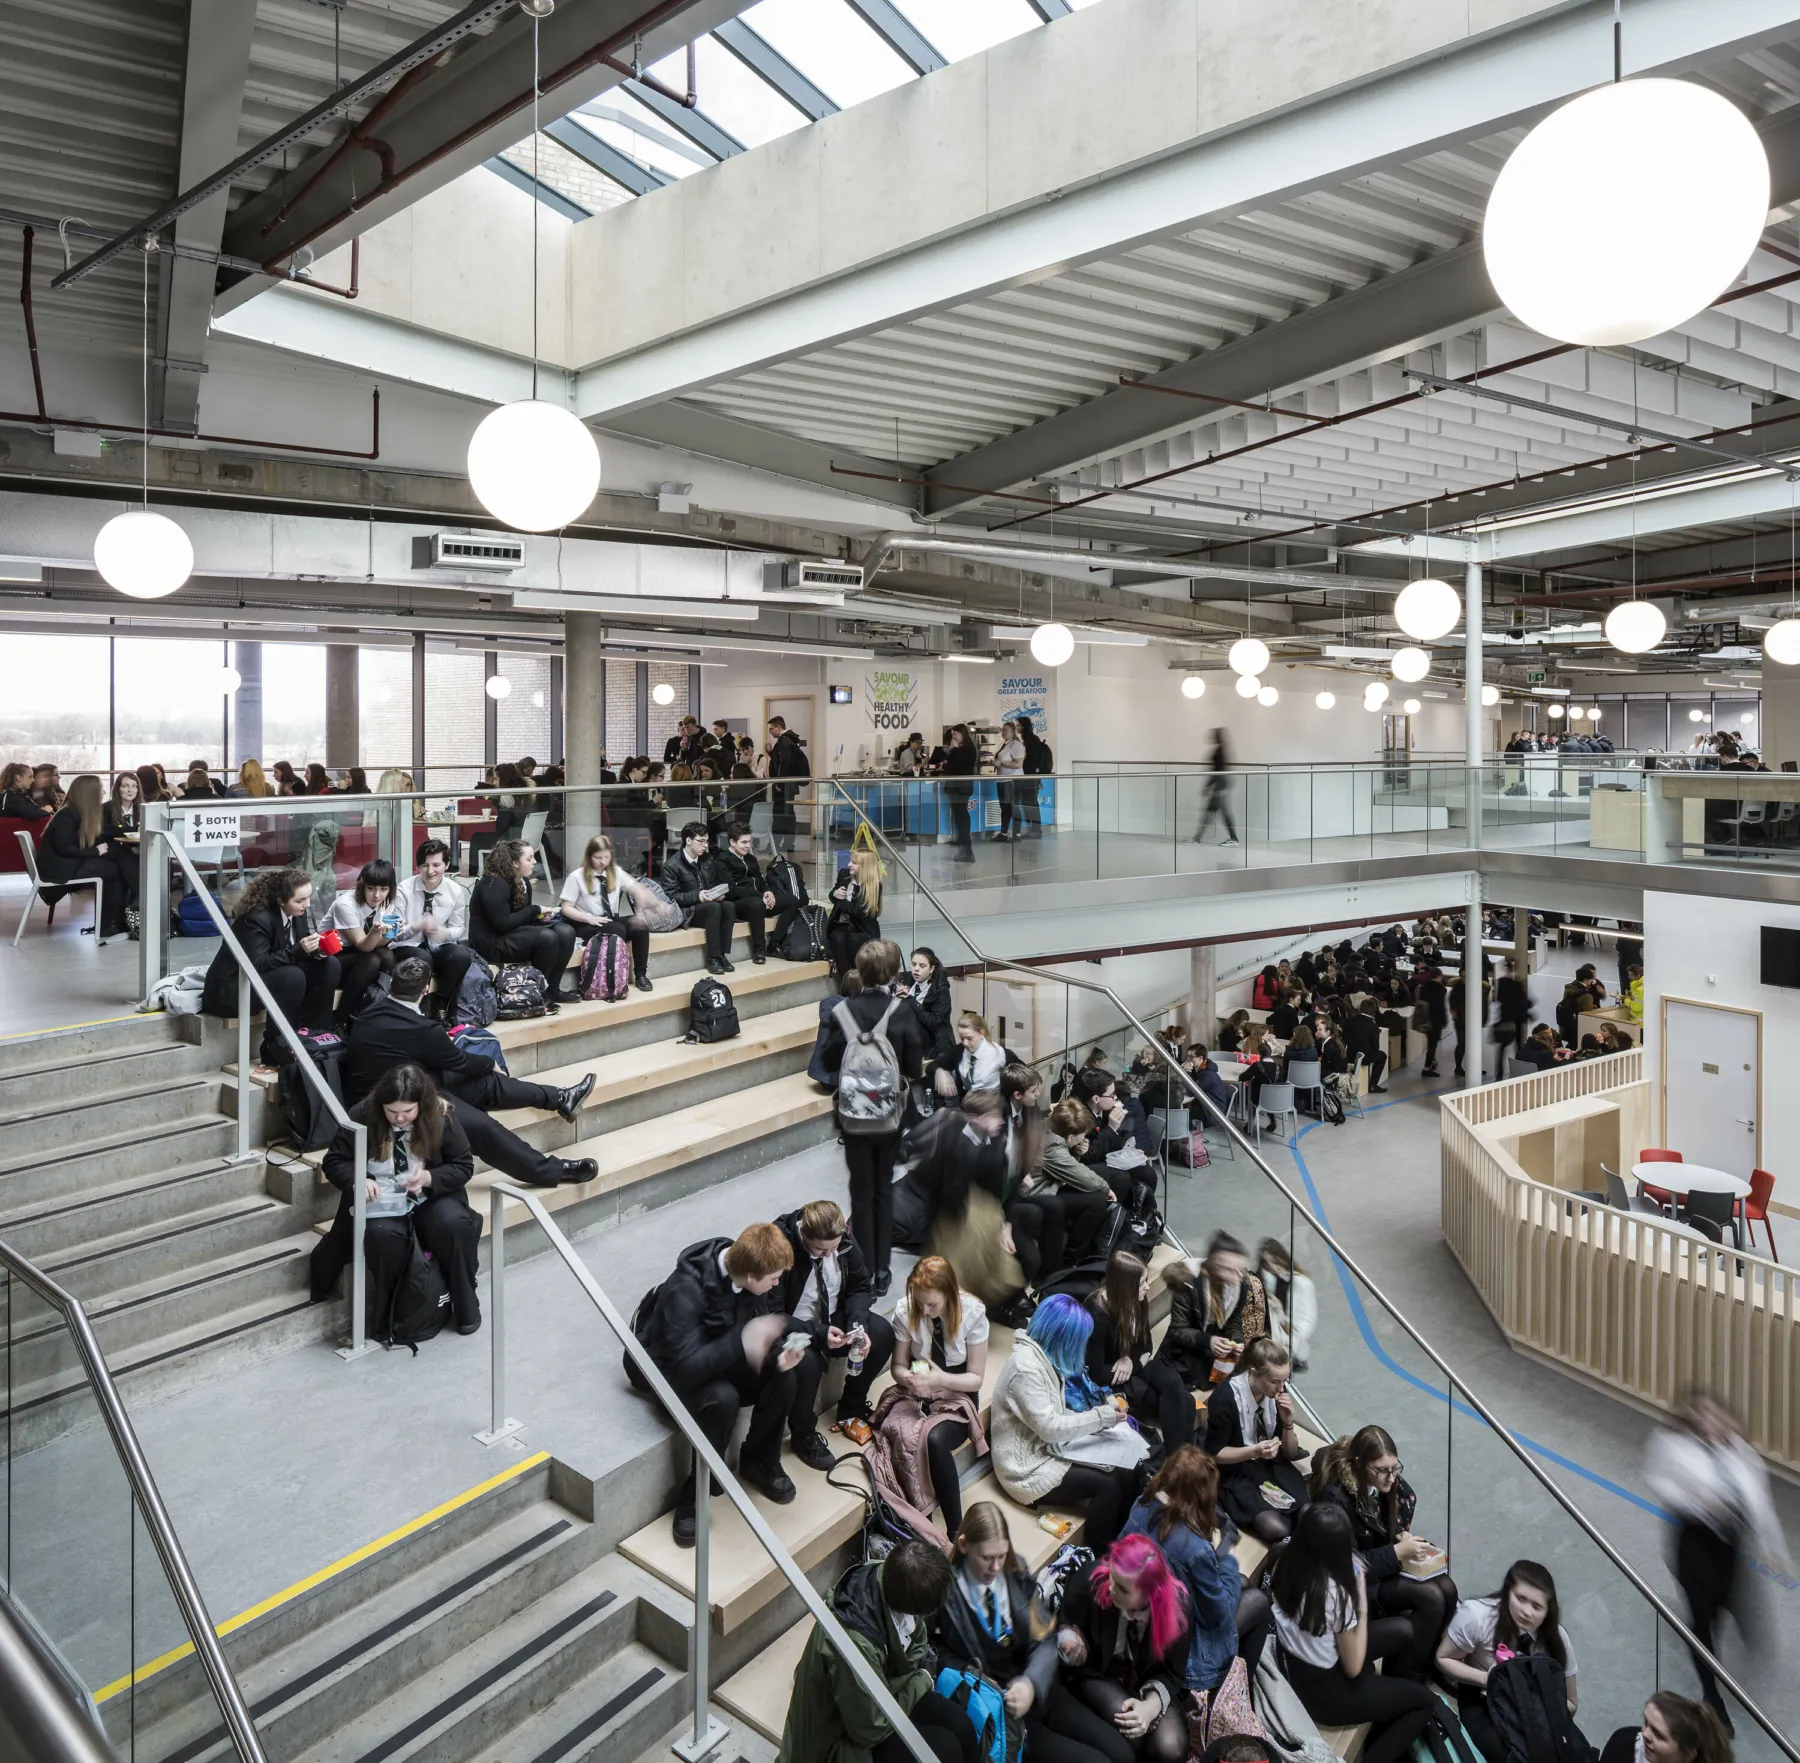 In the central atrium at Garnock School, Scotland. Pupils sit beside the stairs on bench seating, and queue in the cafeteria. The design features exposed services, concrete and large skylights. One of the projects of Thomson Gray Construction Consultants.